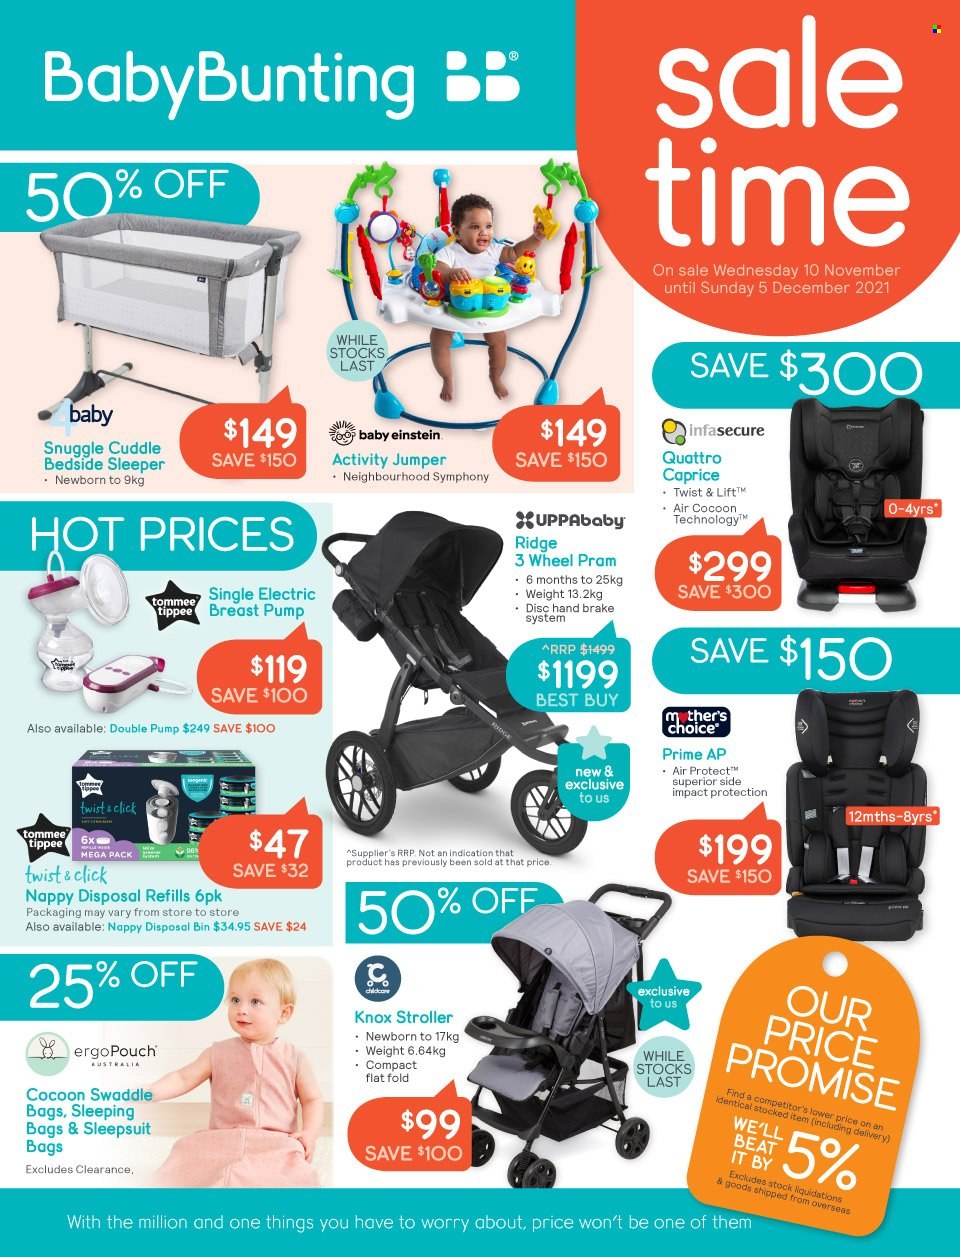 thumbnail - Baby Bunting Catalogue - 10 Nov 2021 - 5 Dec 2021 - Sales products - nappies, sweater, sleepsuit, pram, baby stroller, pump, breast pump, Baby Einstein, nappy disposal bin. Page 1.